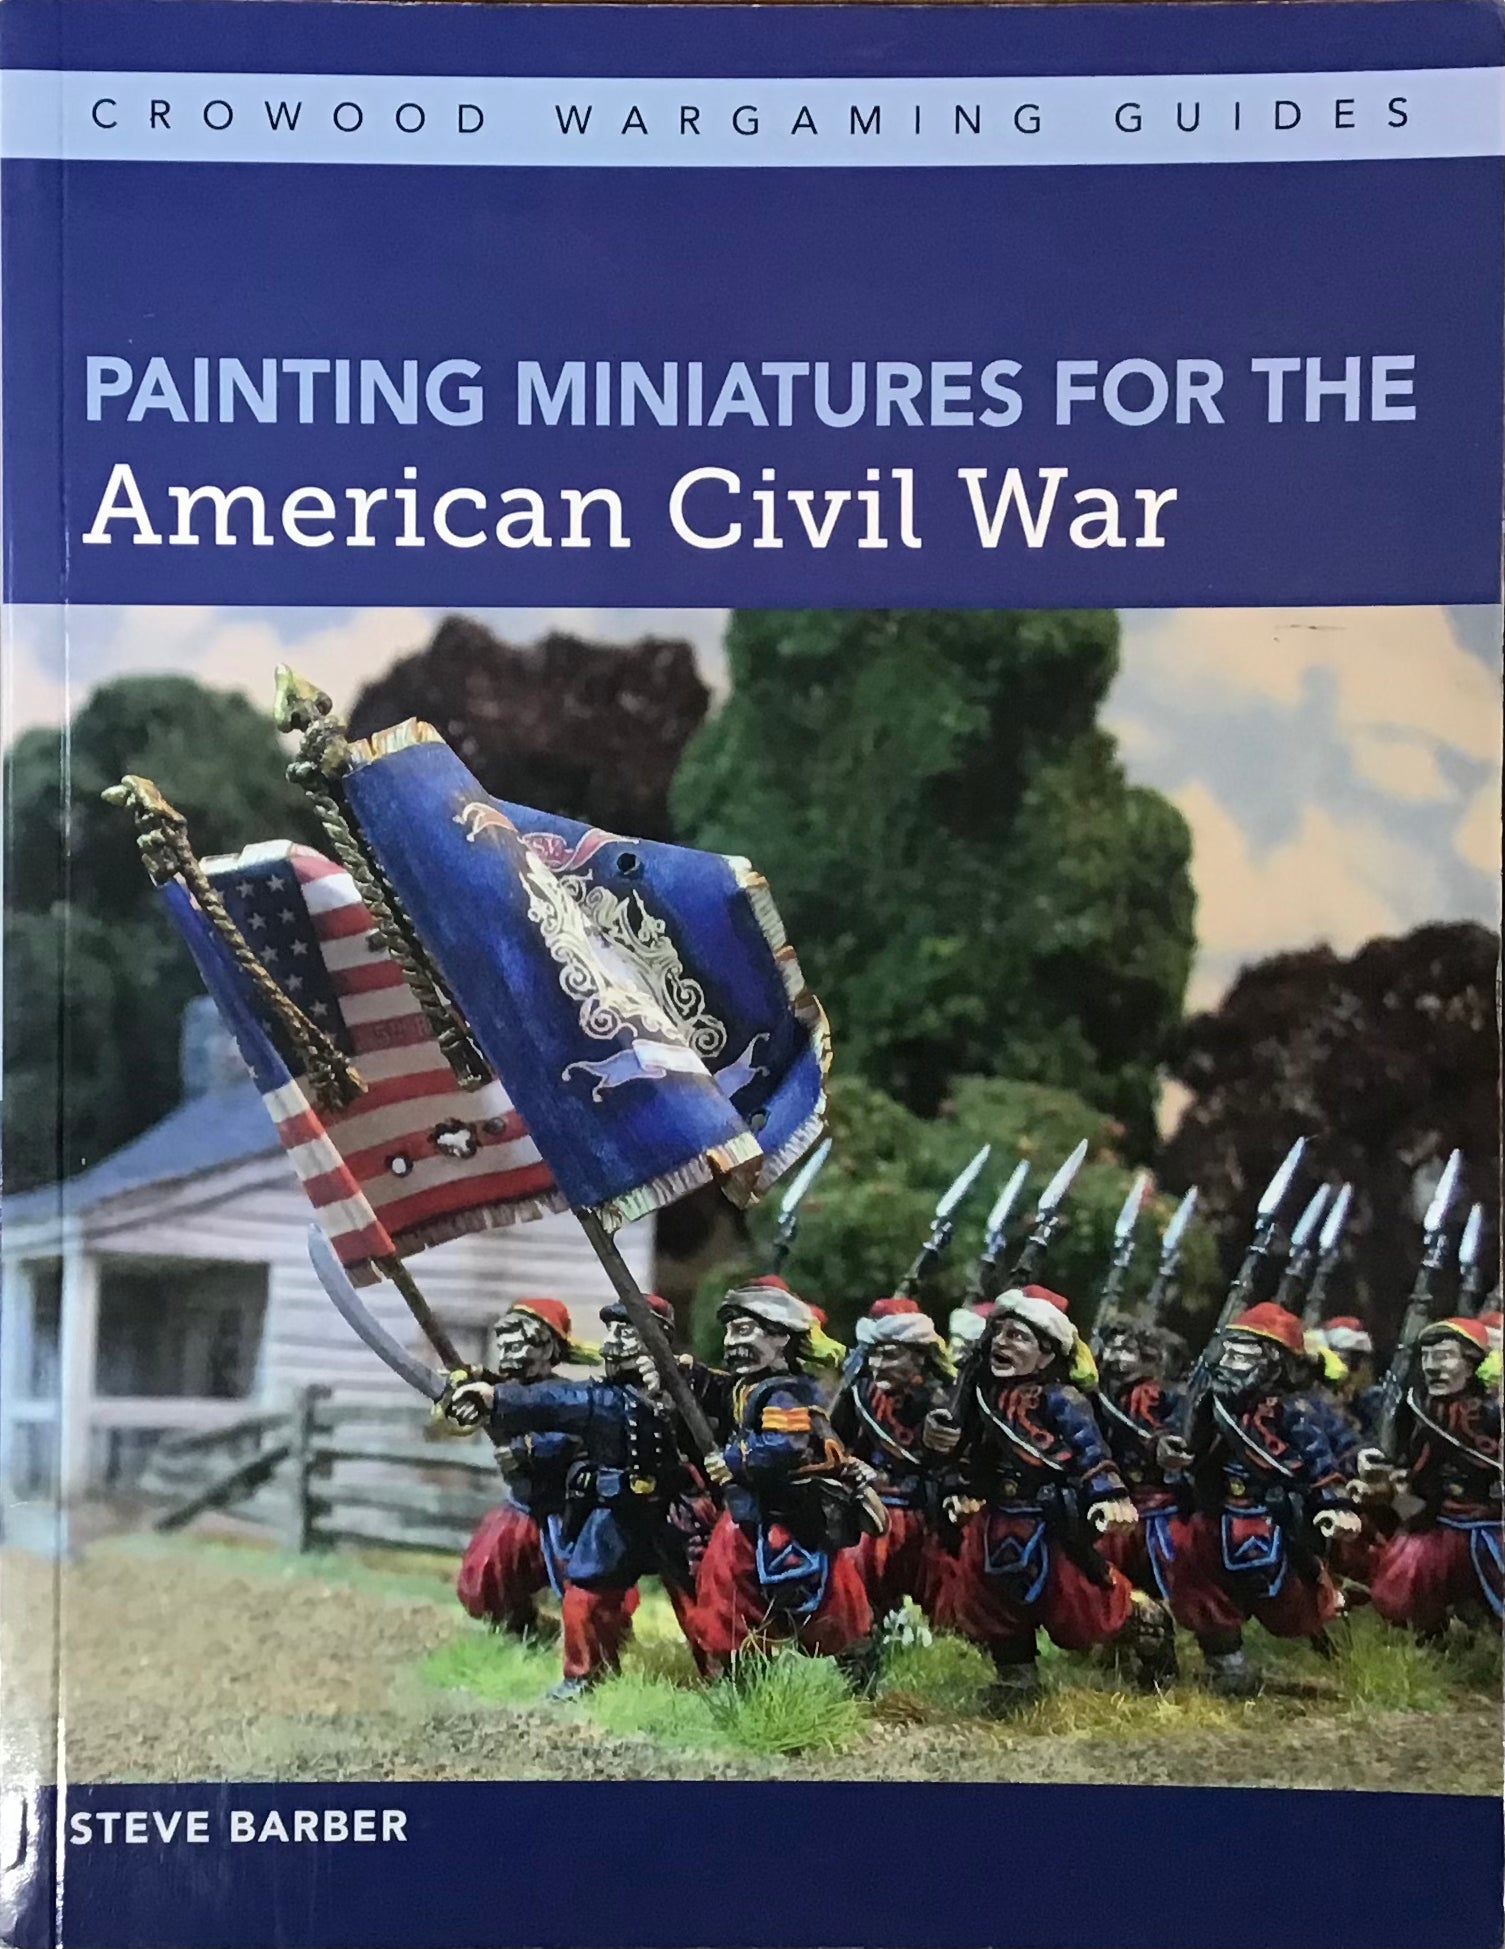 Painting Miniatures for the American Civil War by Steve Barber - Chester Model Centre